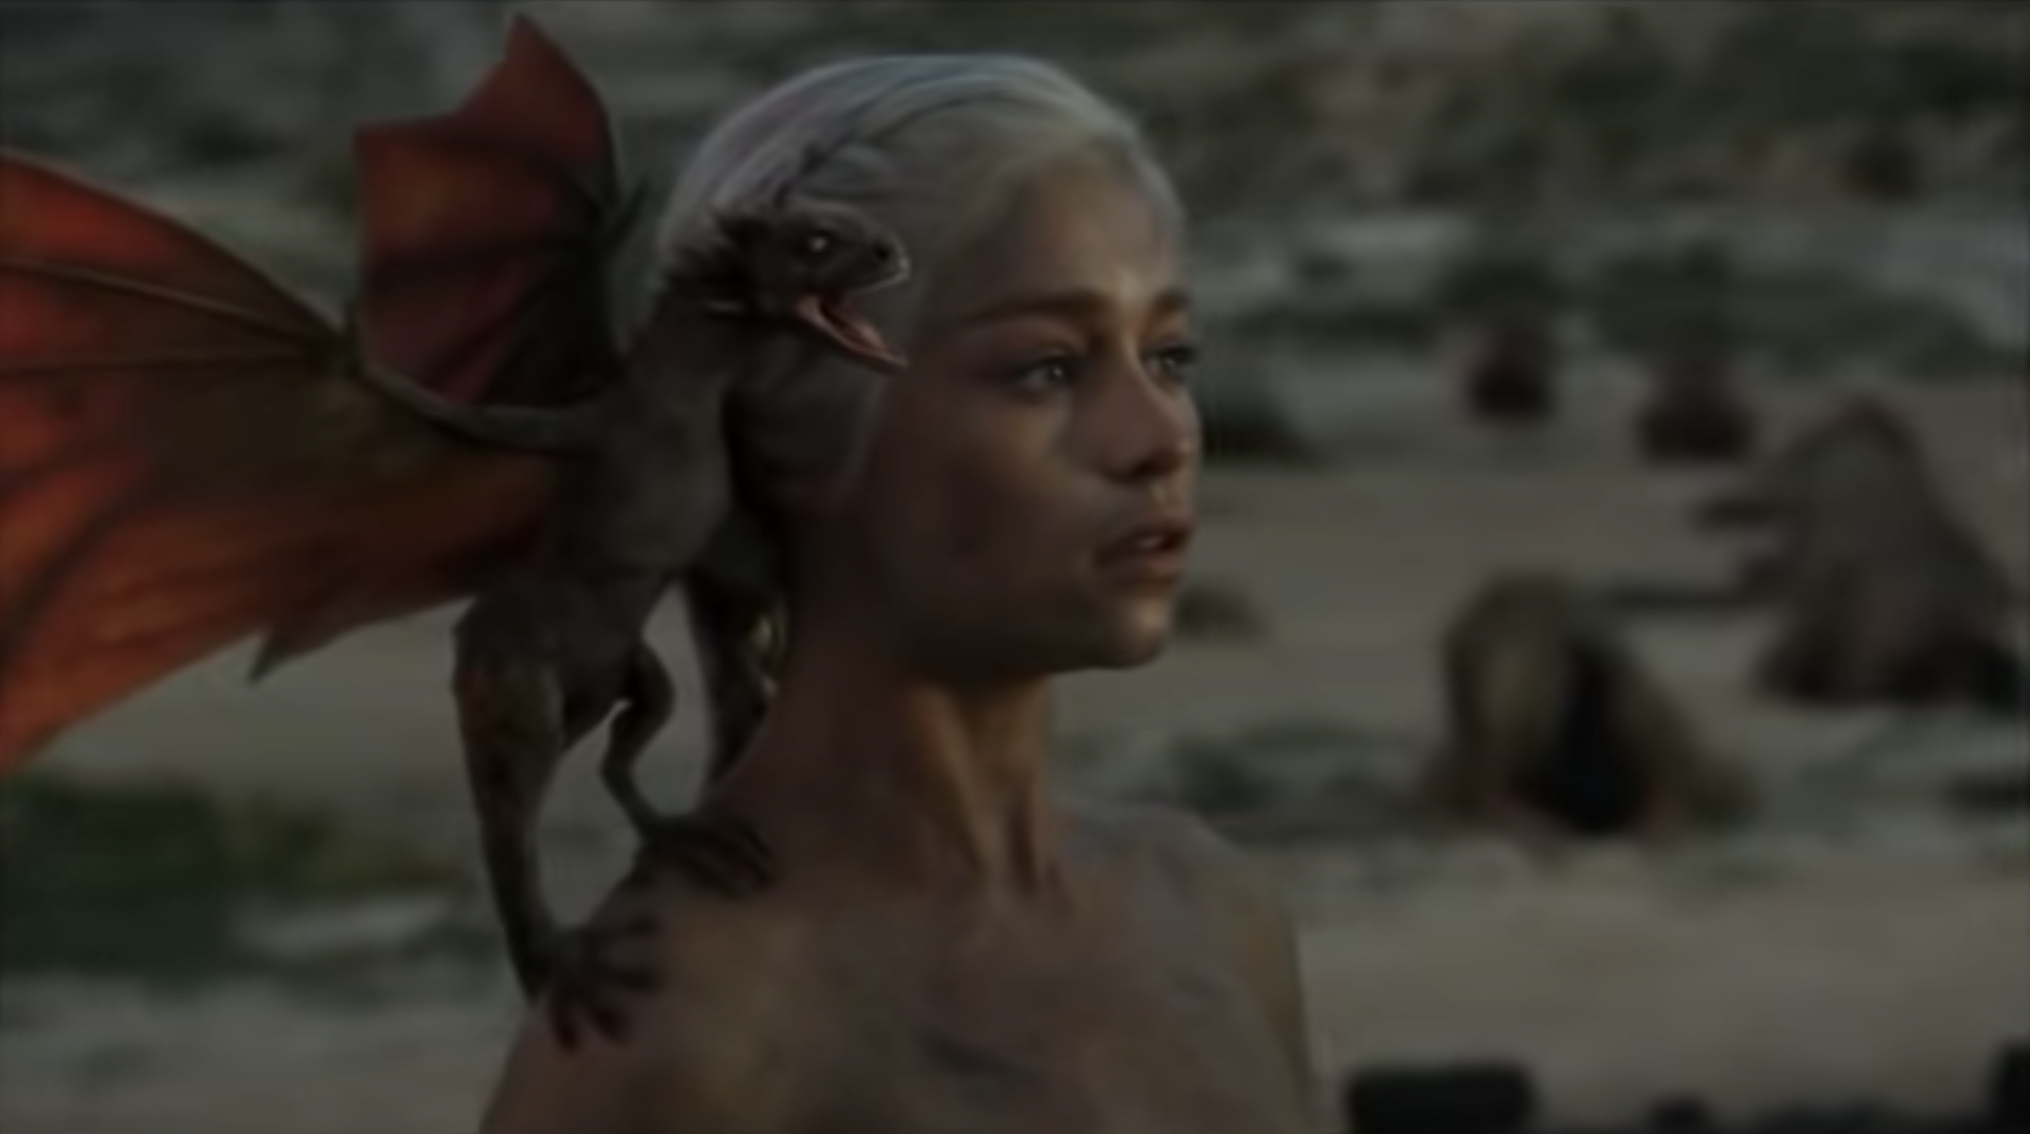 Still from Game of Thrones: Daenerys is covered in ashes with a baby dragon on her shoulder